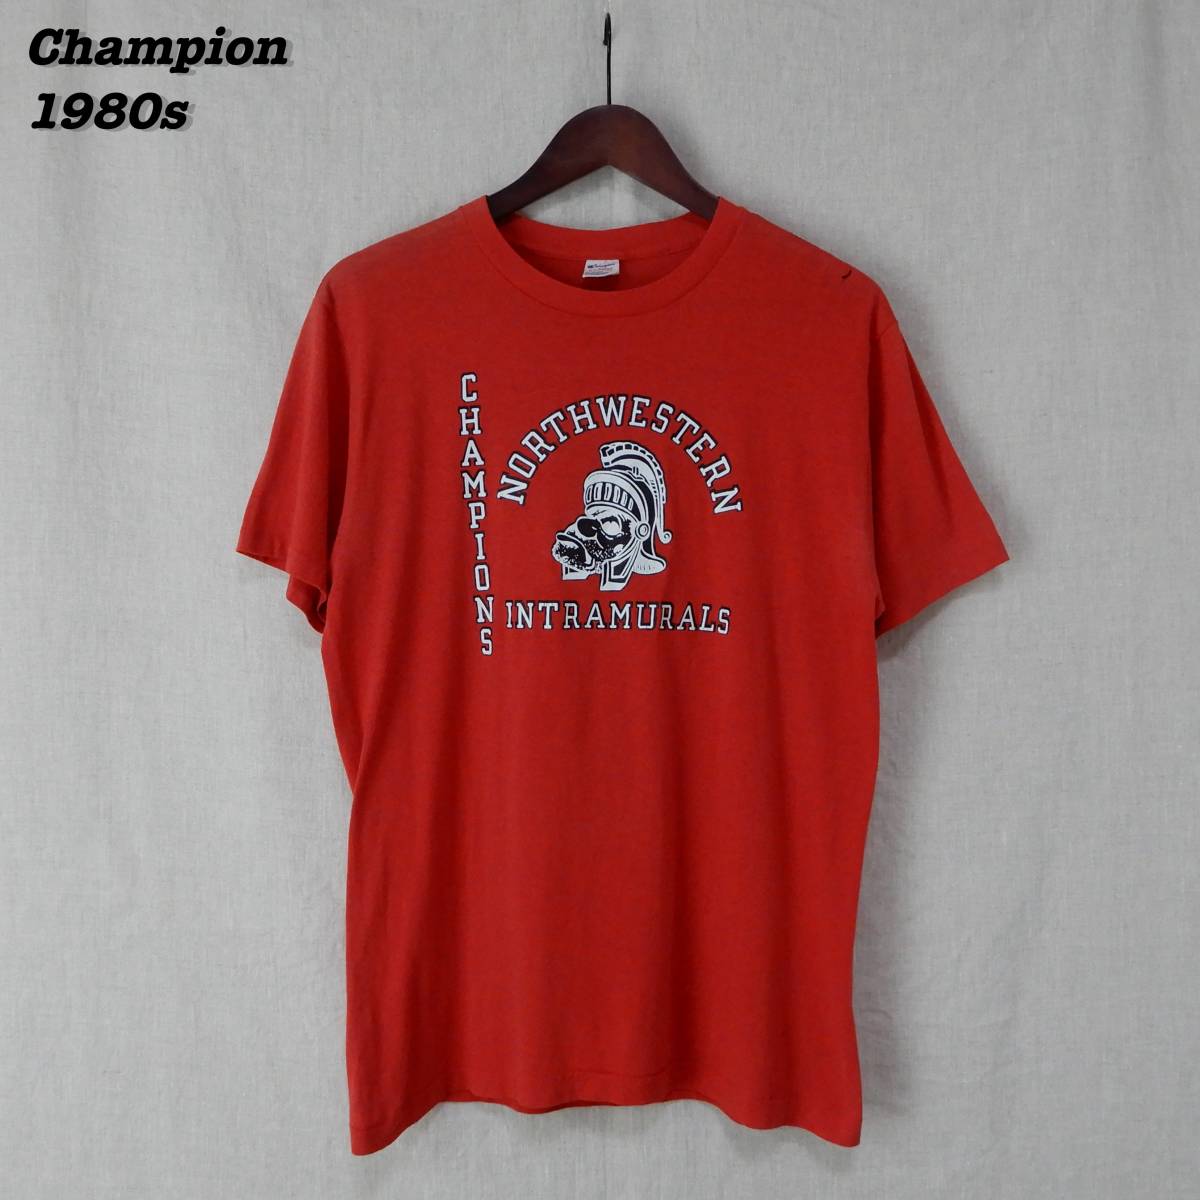 Champion T-Shirts 1980s X-LARGE T159 Vintage Made in USA チャンピオン Tシャツ 1980年代 アメリカ製 ヴィンテージ